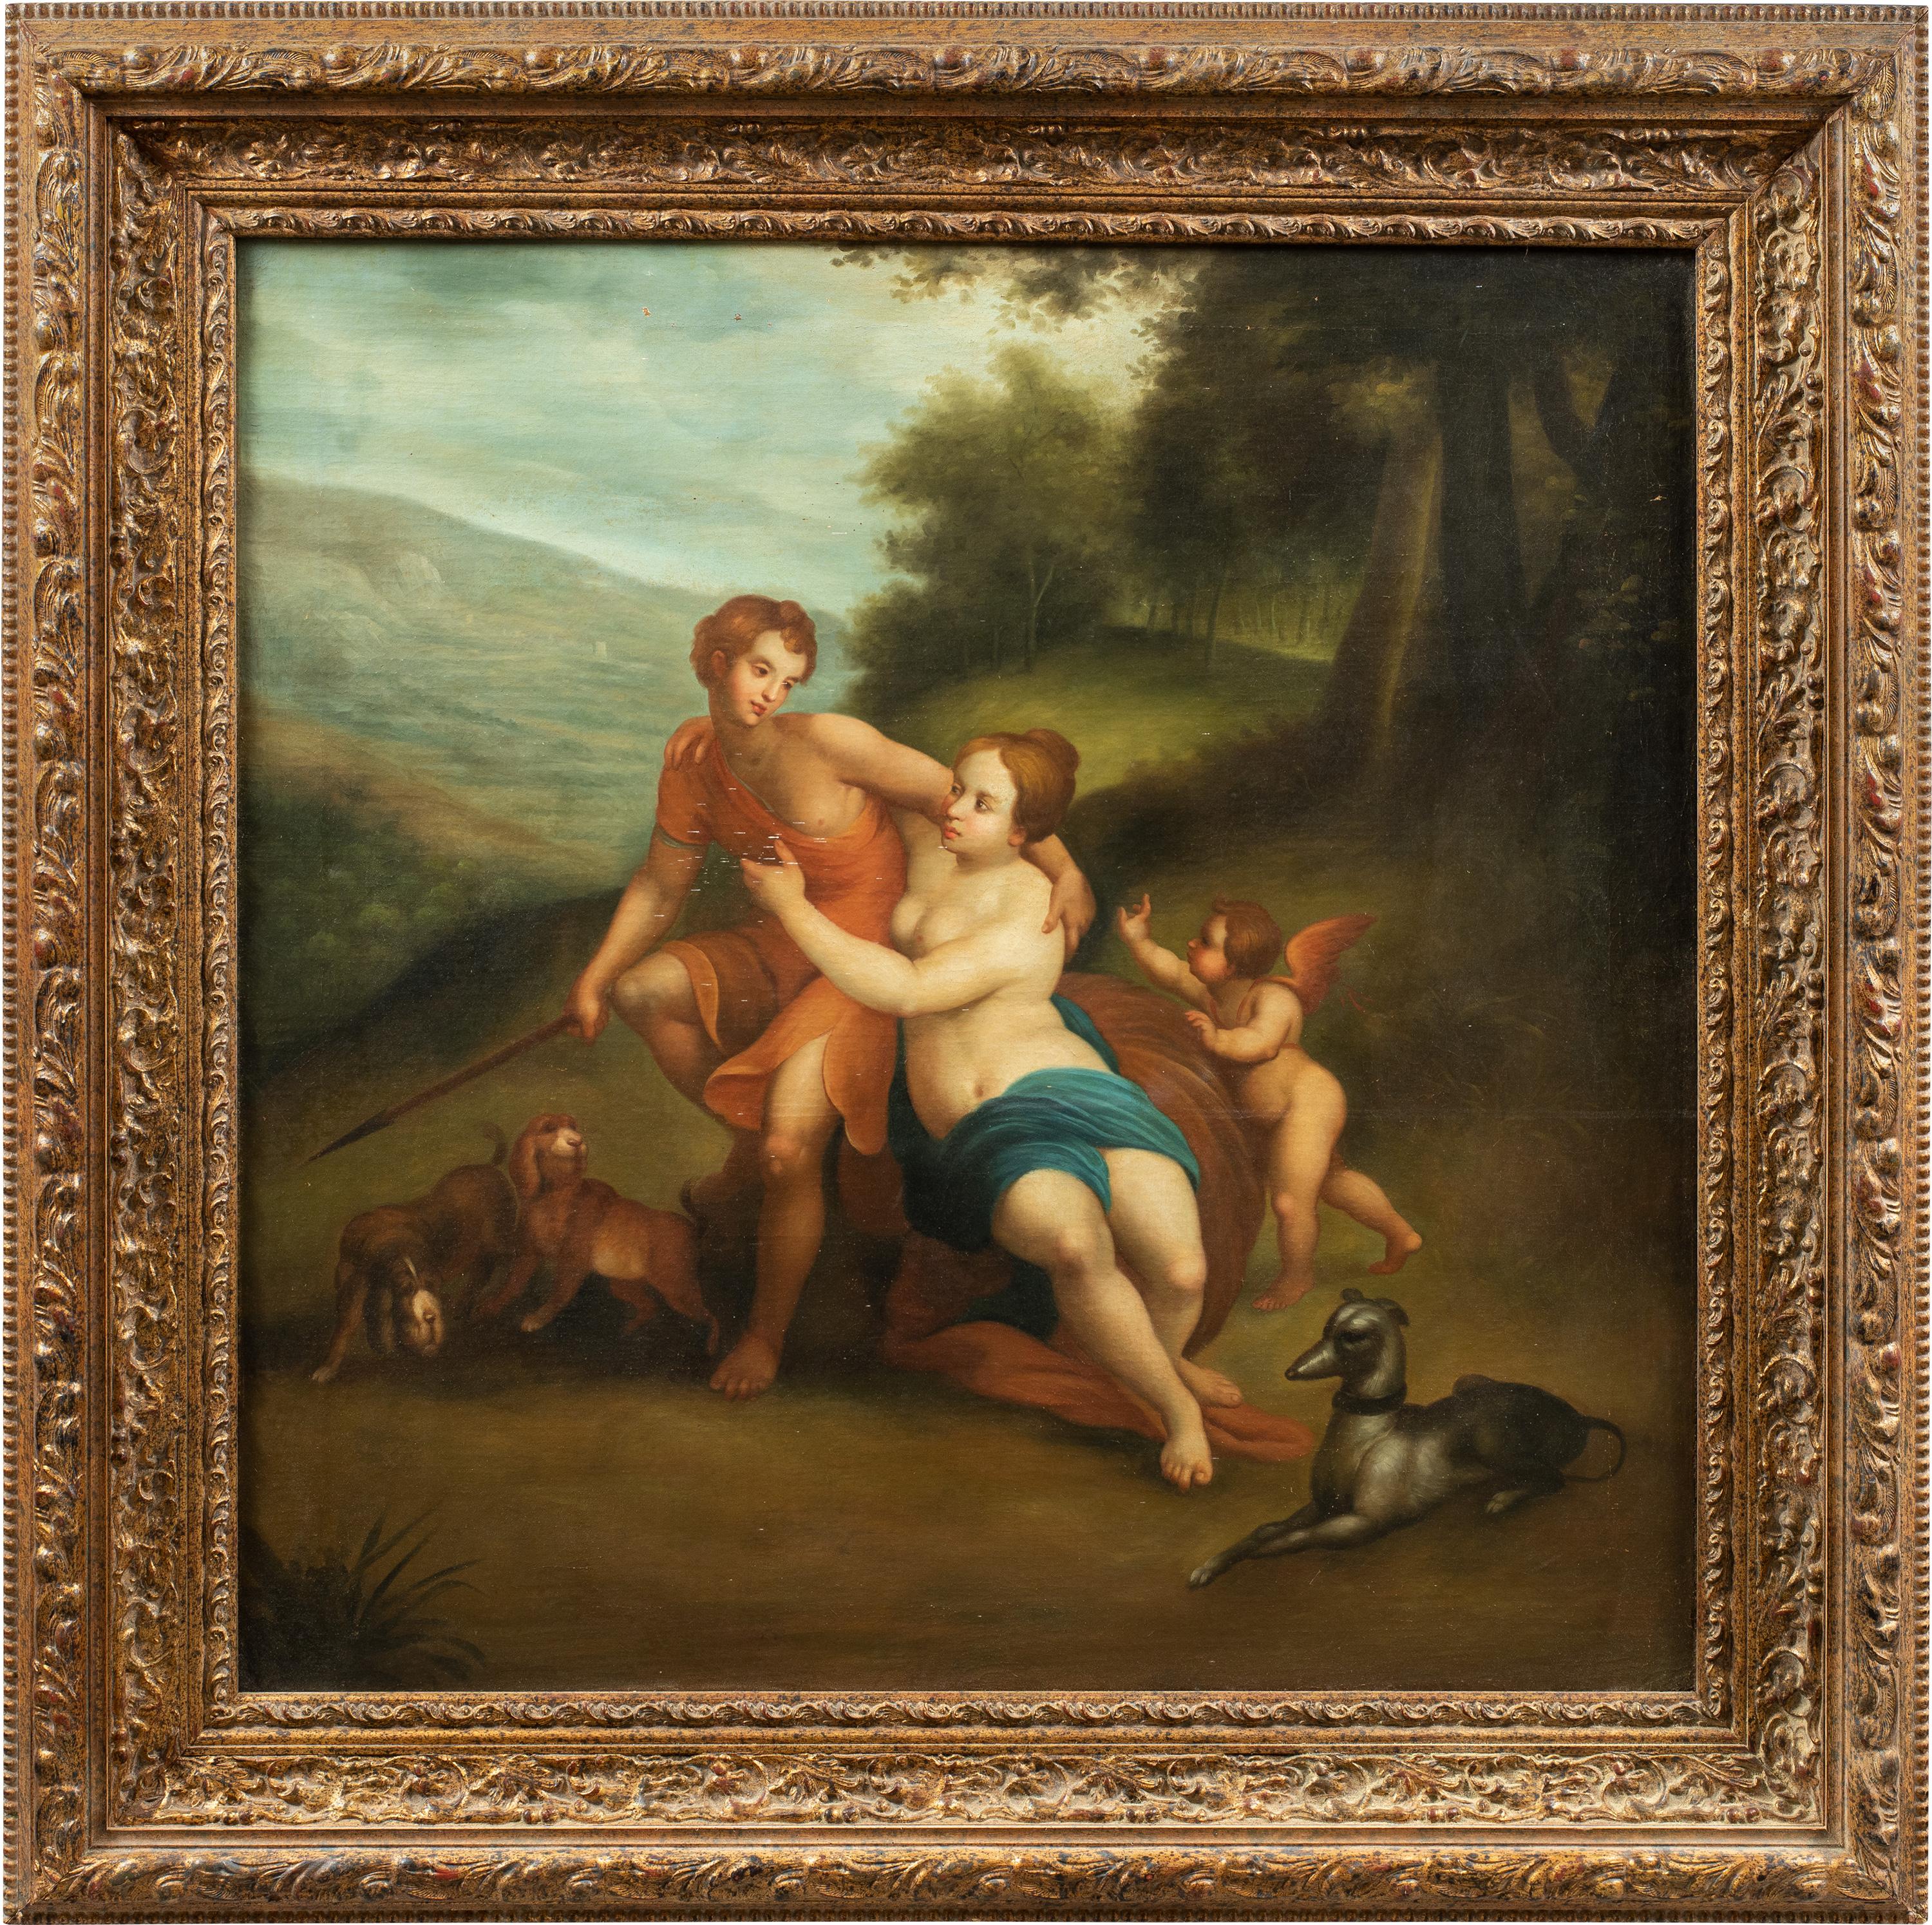 Unknown Landscape Painting - Neoclassical painter - 18th-19th century figure painting - Mythological - Italy